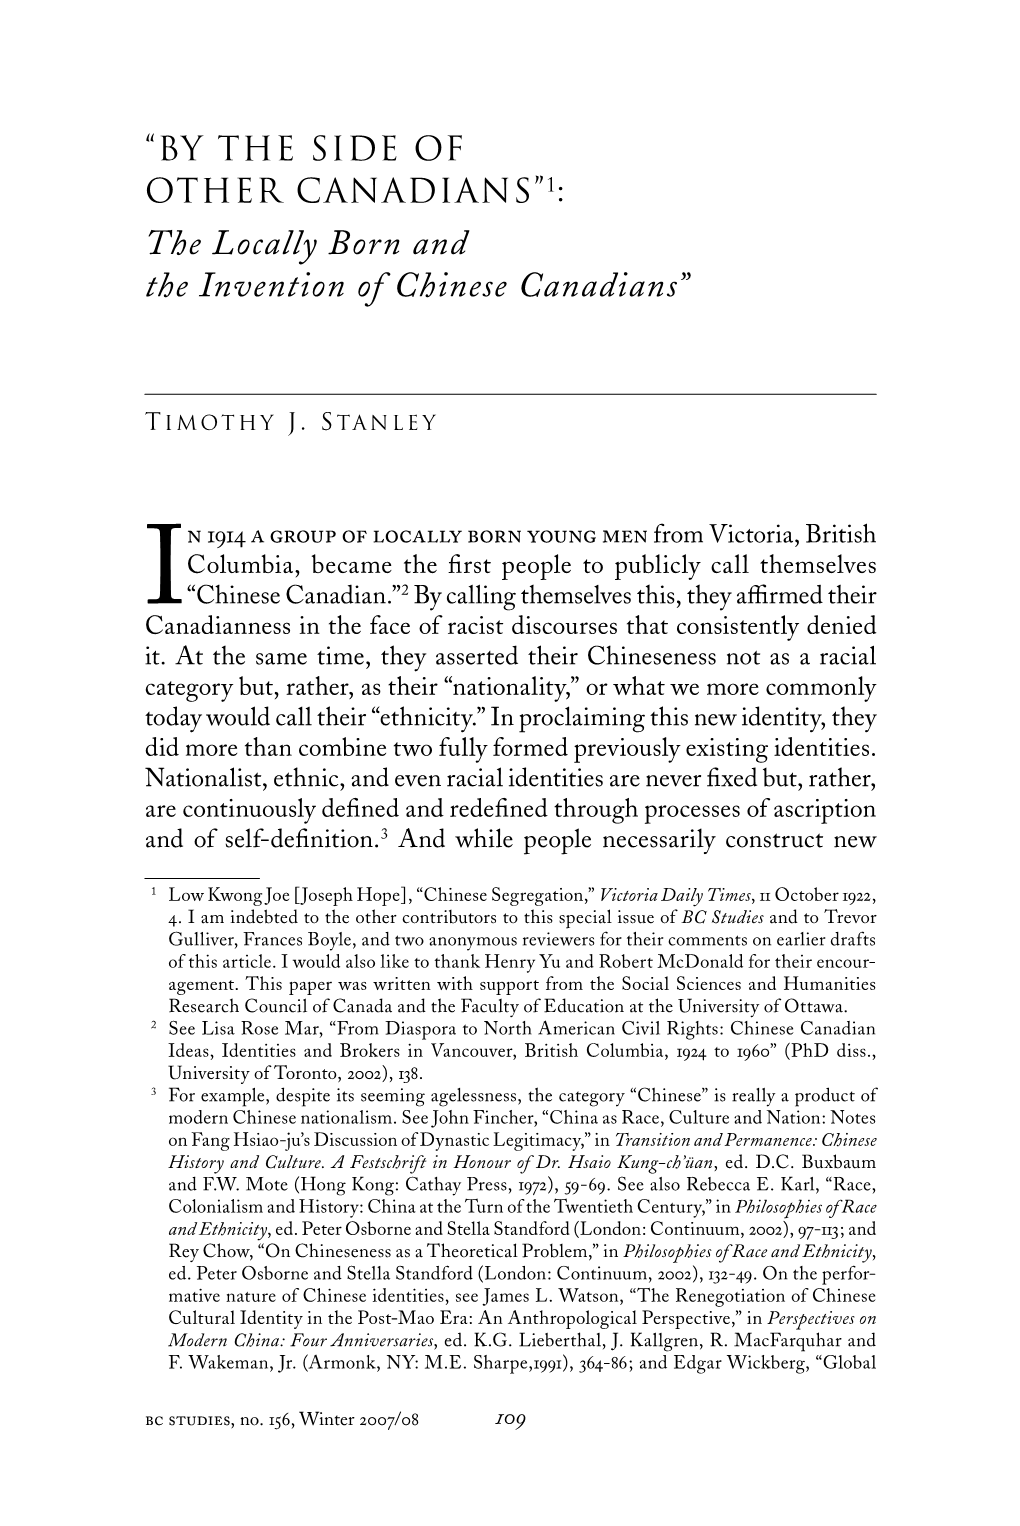 The Locally Born and the Invention of Chinese Canadians”